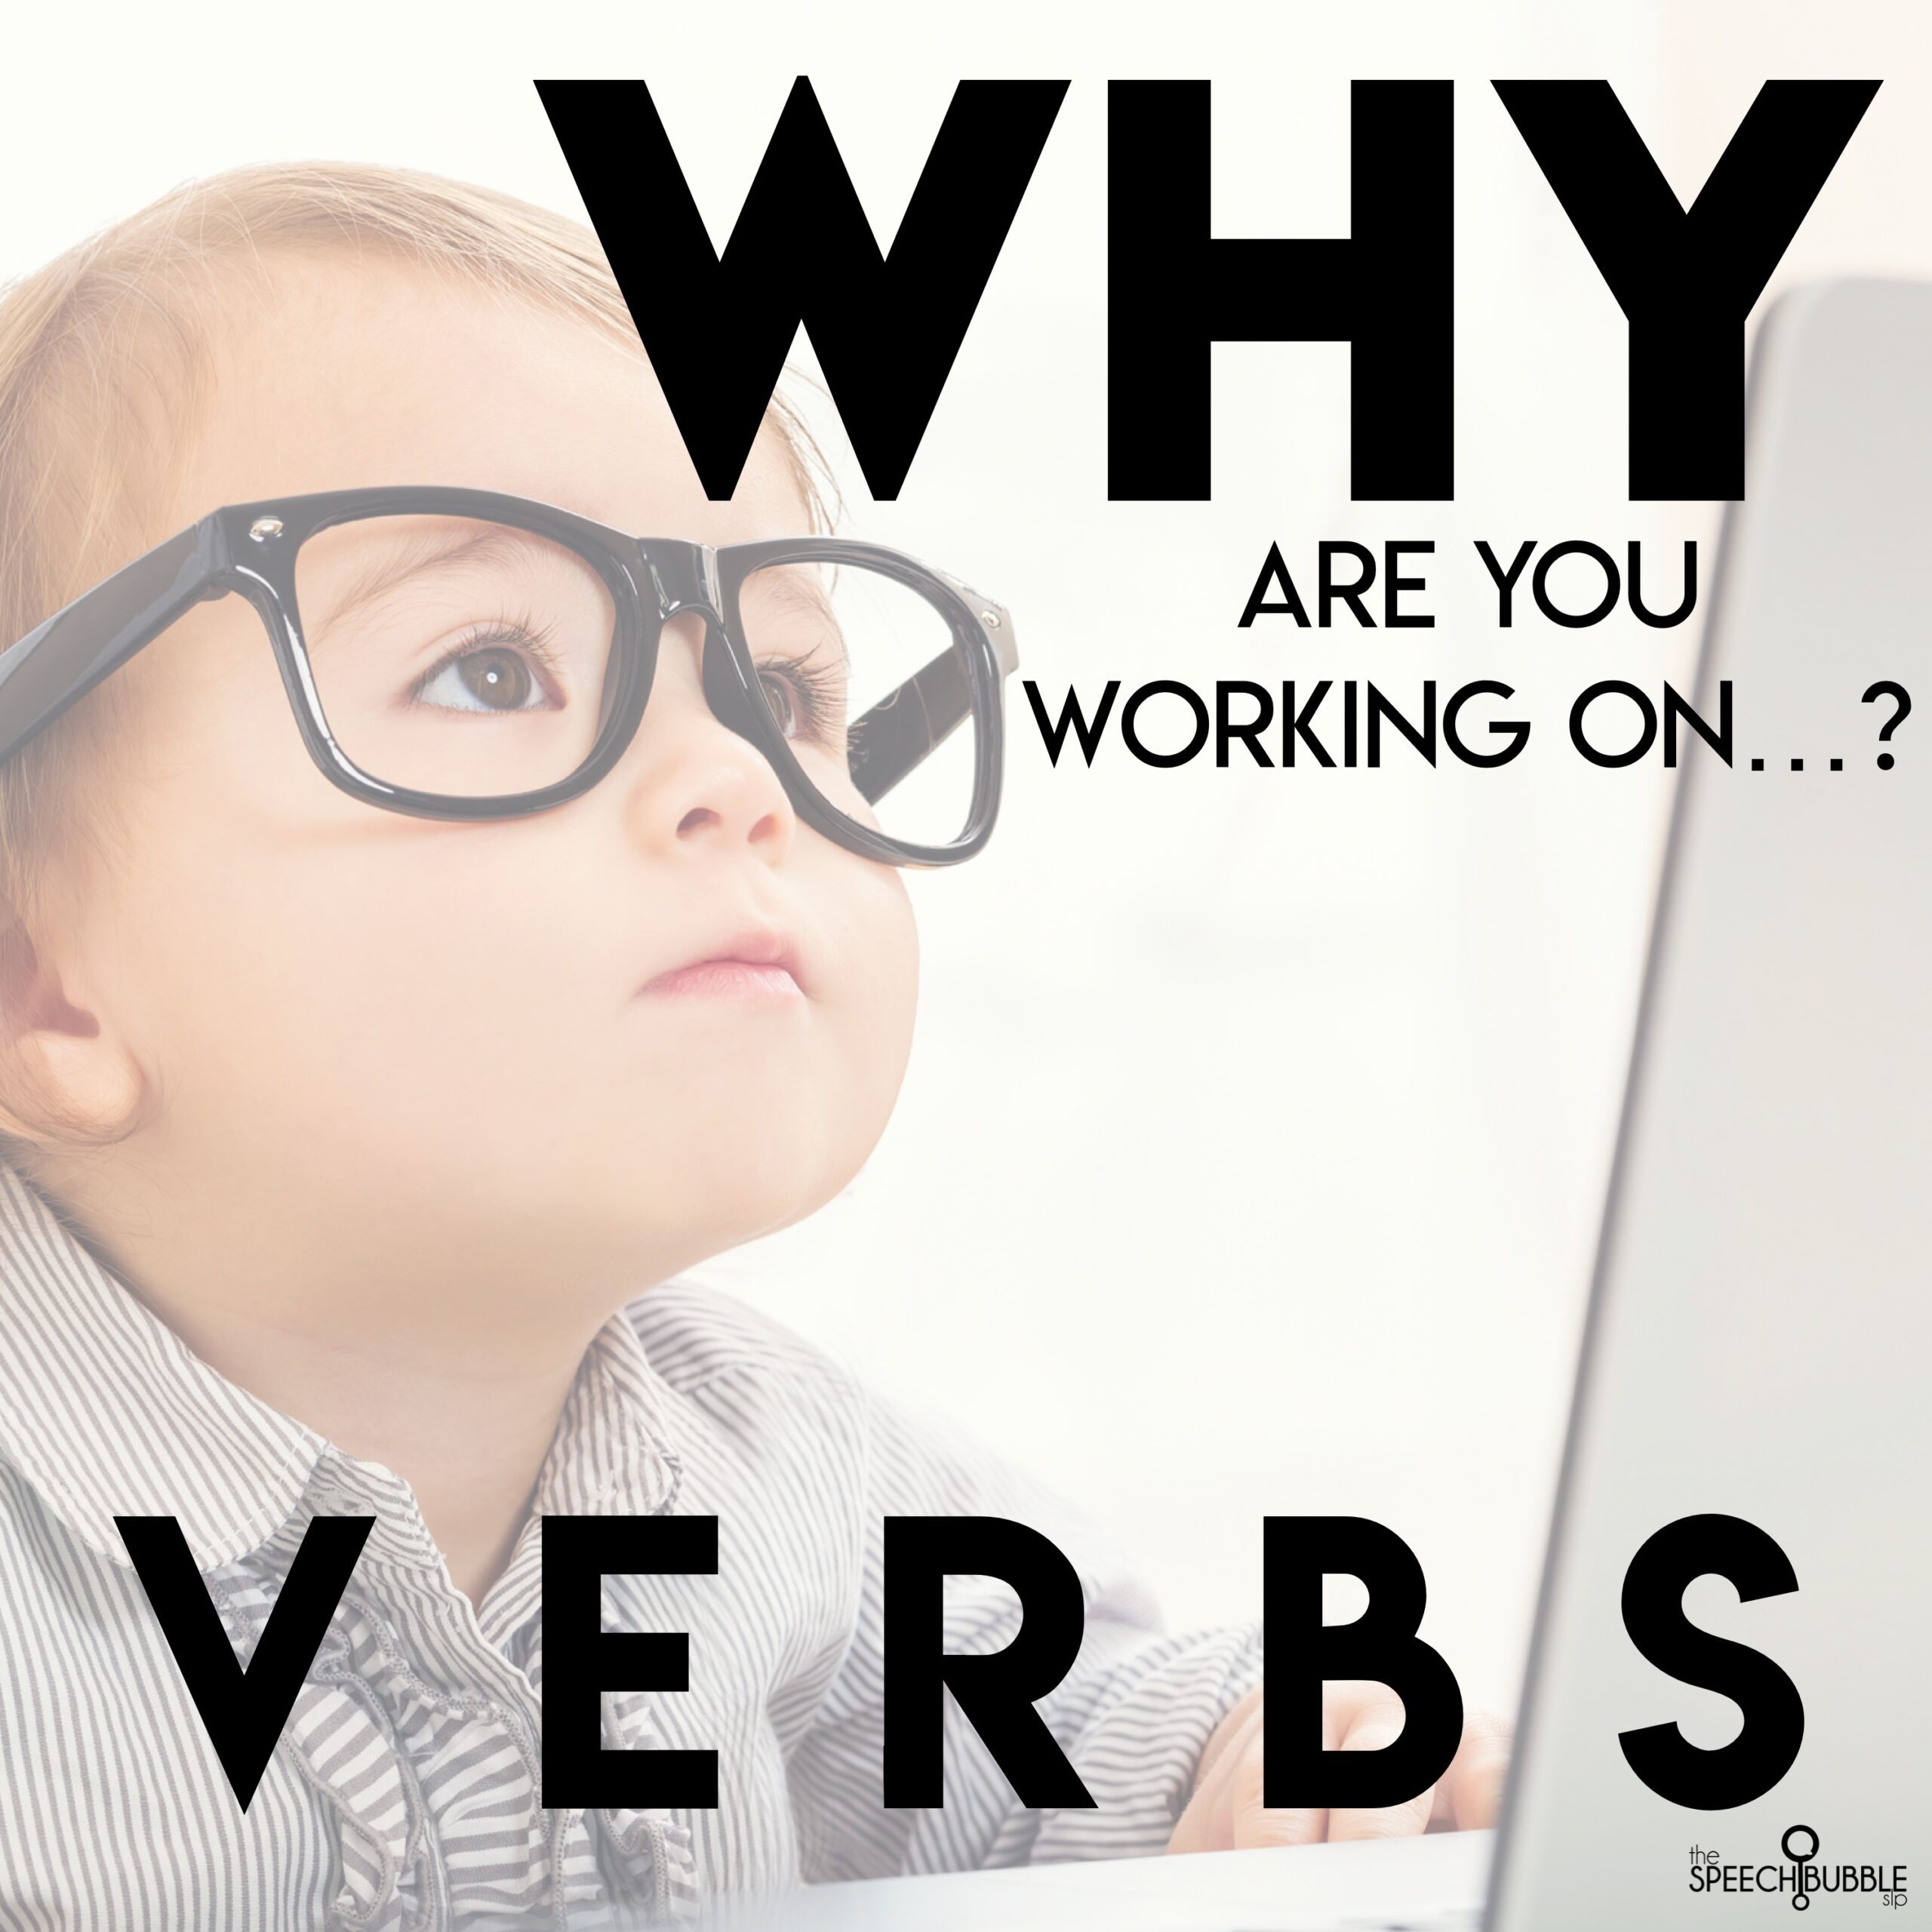 Why are you working on…verbs